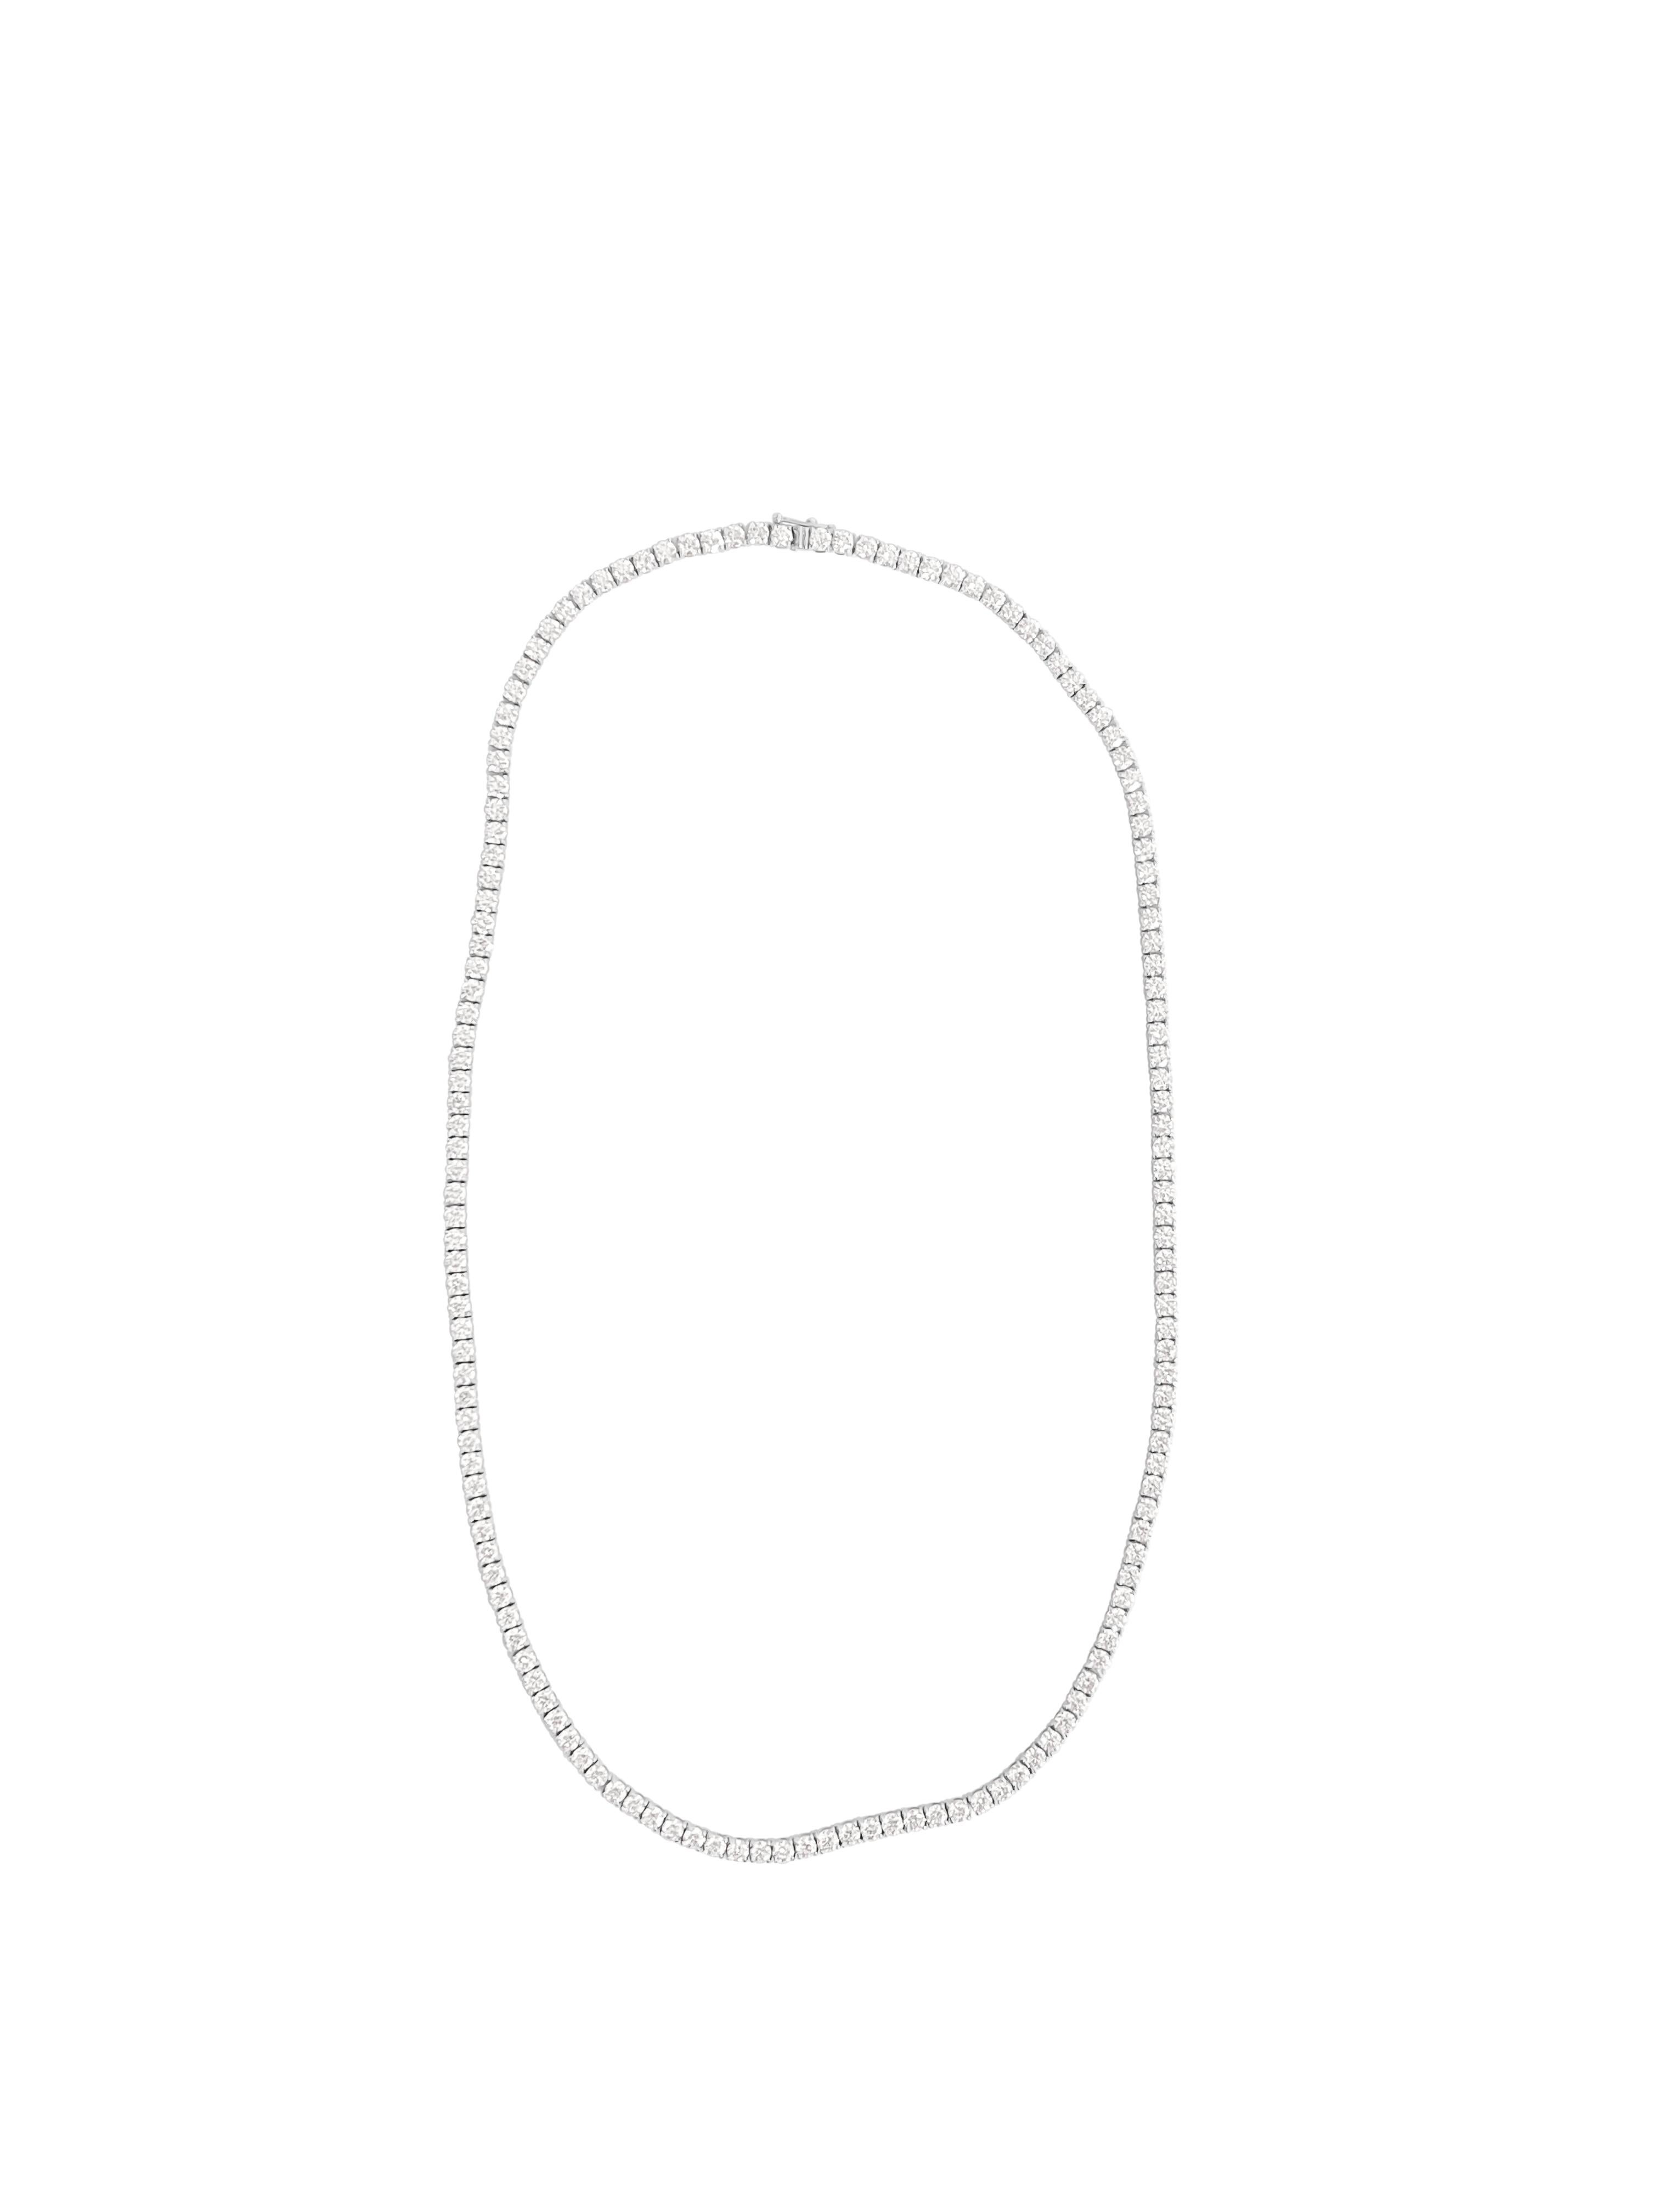 Metal: 14K white gold
Diamonds: 28.50 carat weight total. 
Cut: Round brilliant
Clarity: VVS
Length: 22.50 inches

Brand new custom made diamond tennis necklace in white gold. 
Unisex tennis necklace.

